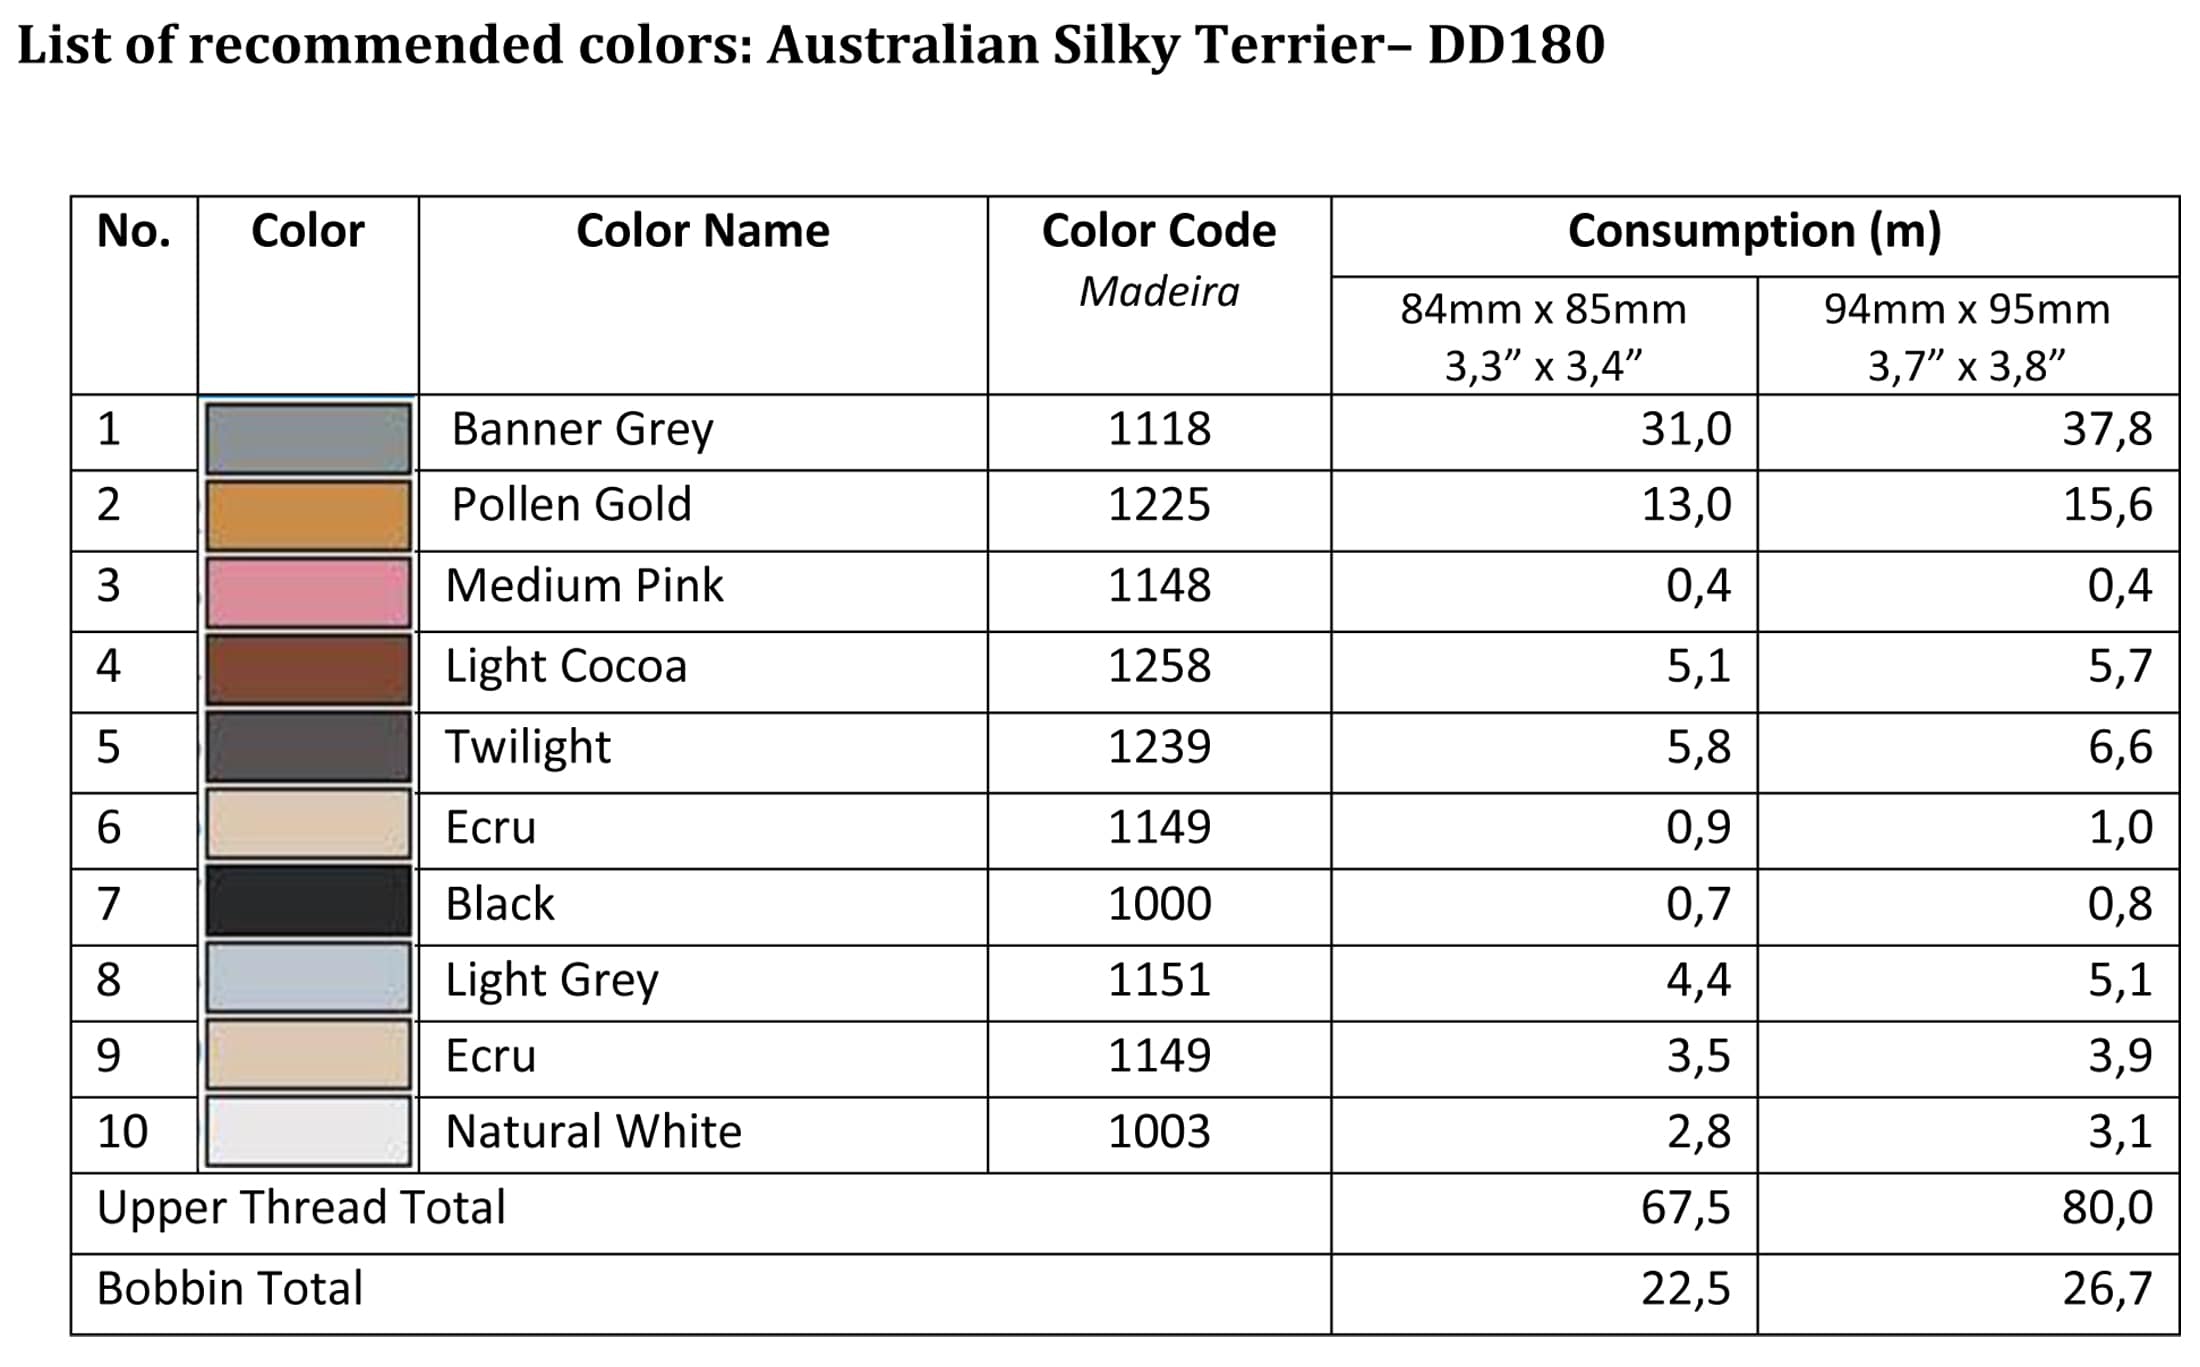 List of recommended colors - DD180